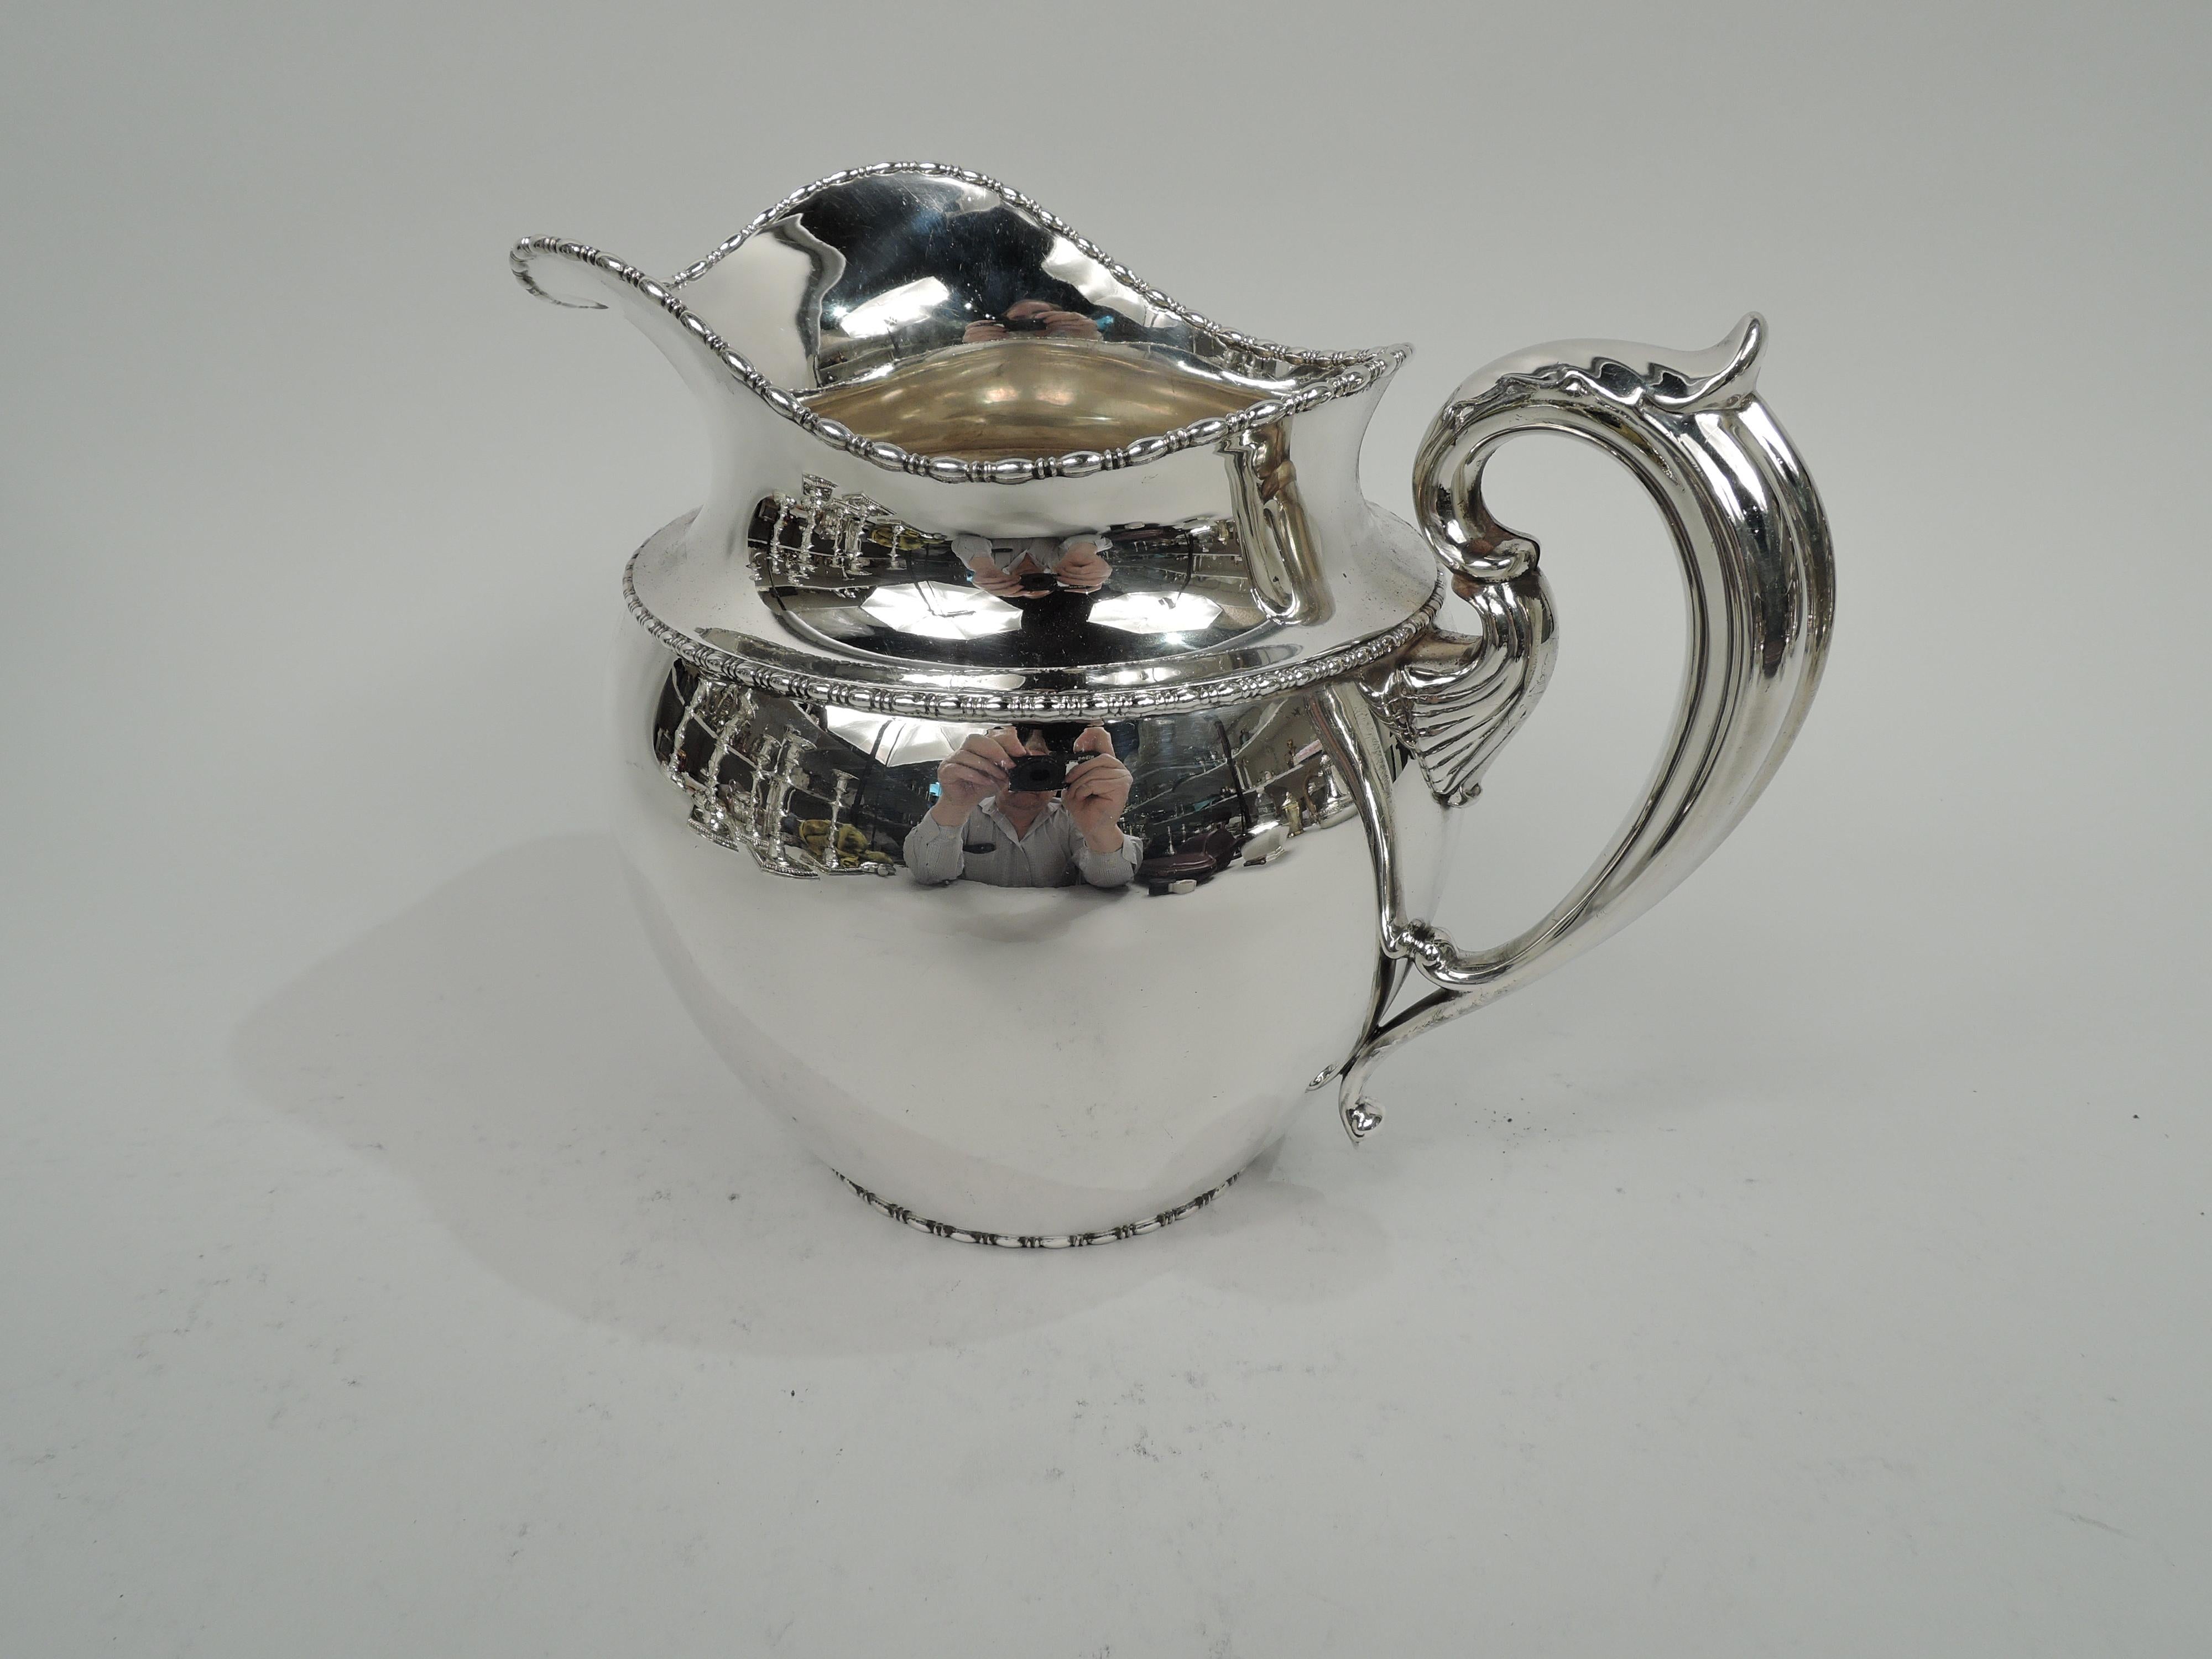 Edwardian Classical sterling silver water pitcher, circa 1910. Wide ovoid body with helmet mouth and leaf-capped scroll handle with split bottom mount. Bead-and-reel rims. Fully marked including no. 25 and marks for Boston firms Bigelow, Kennard and